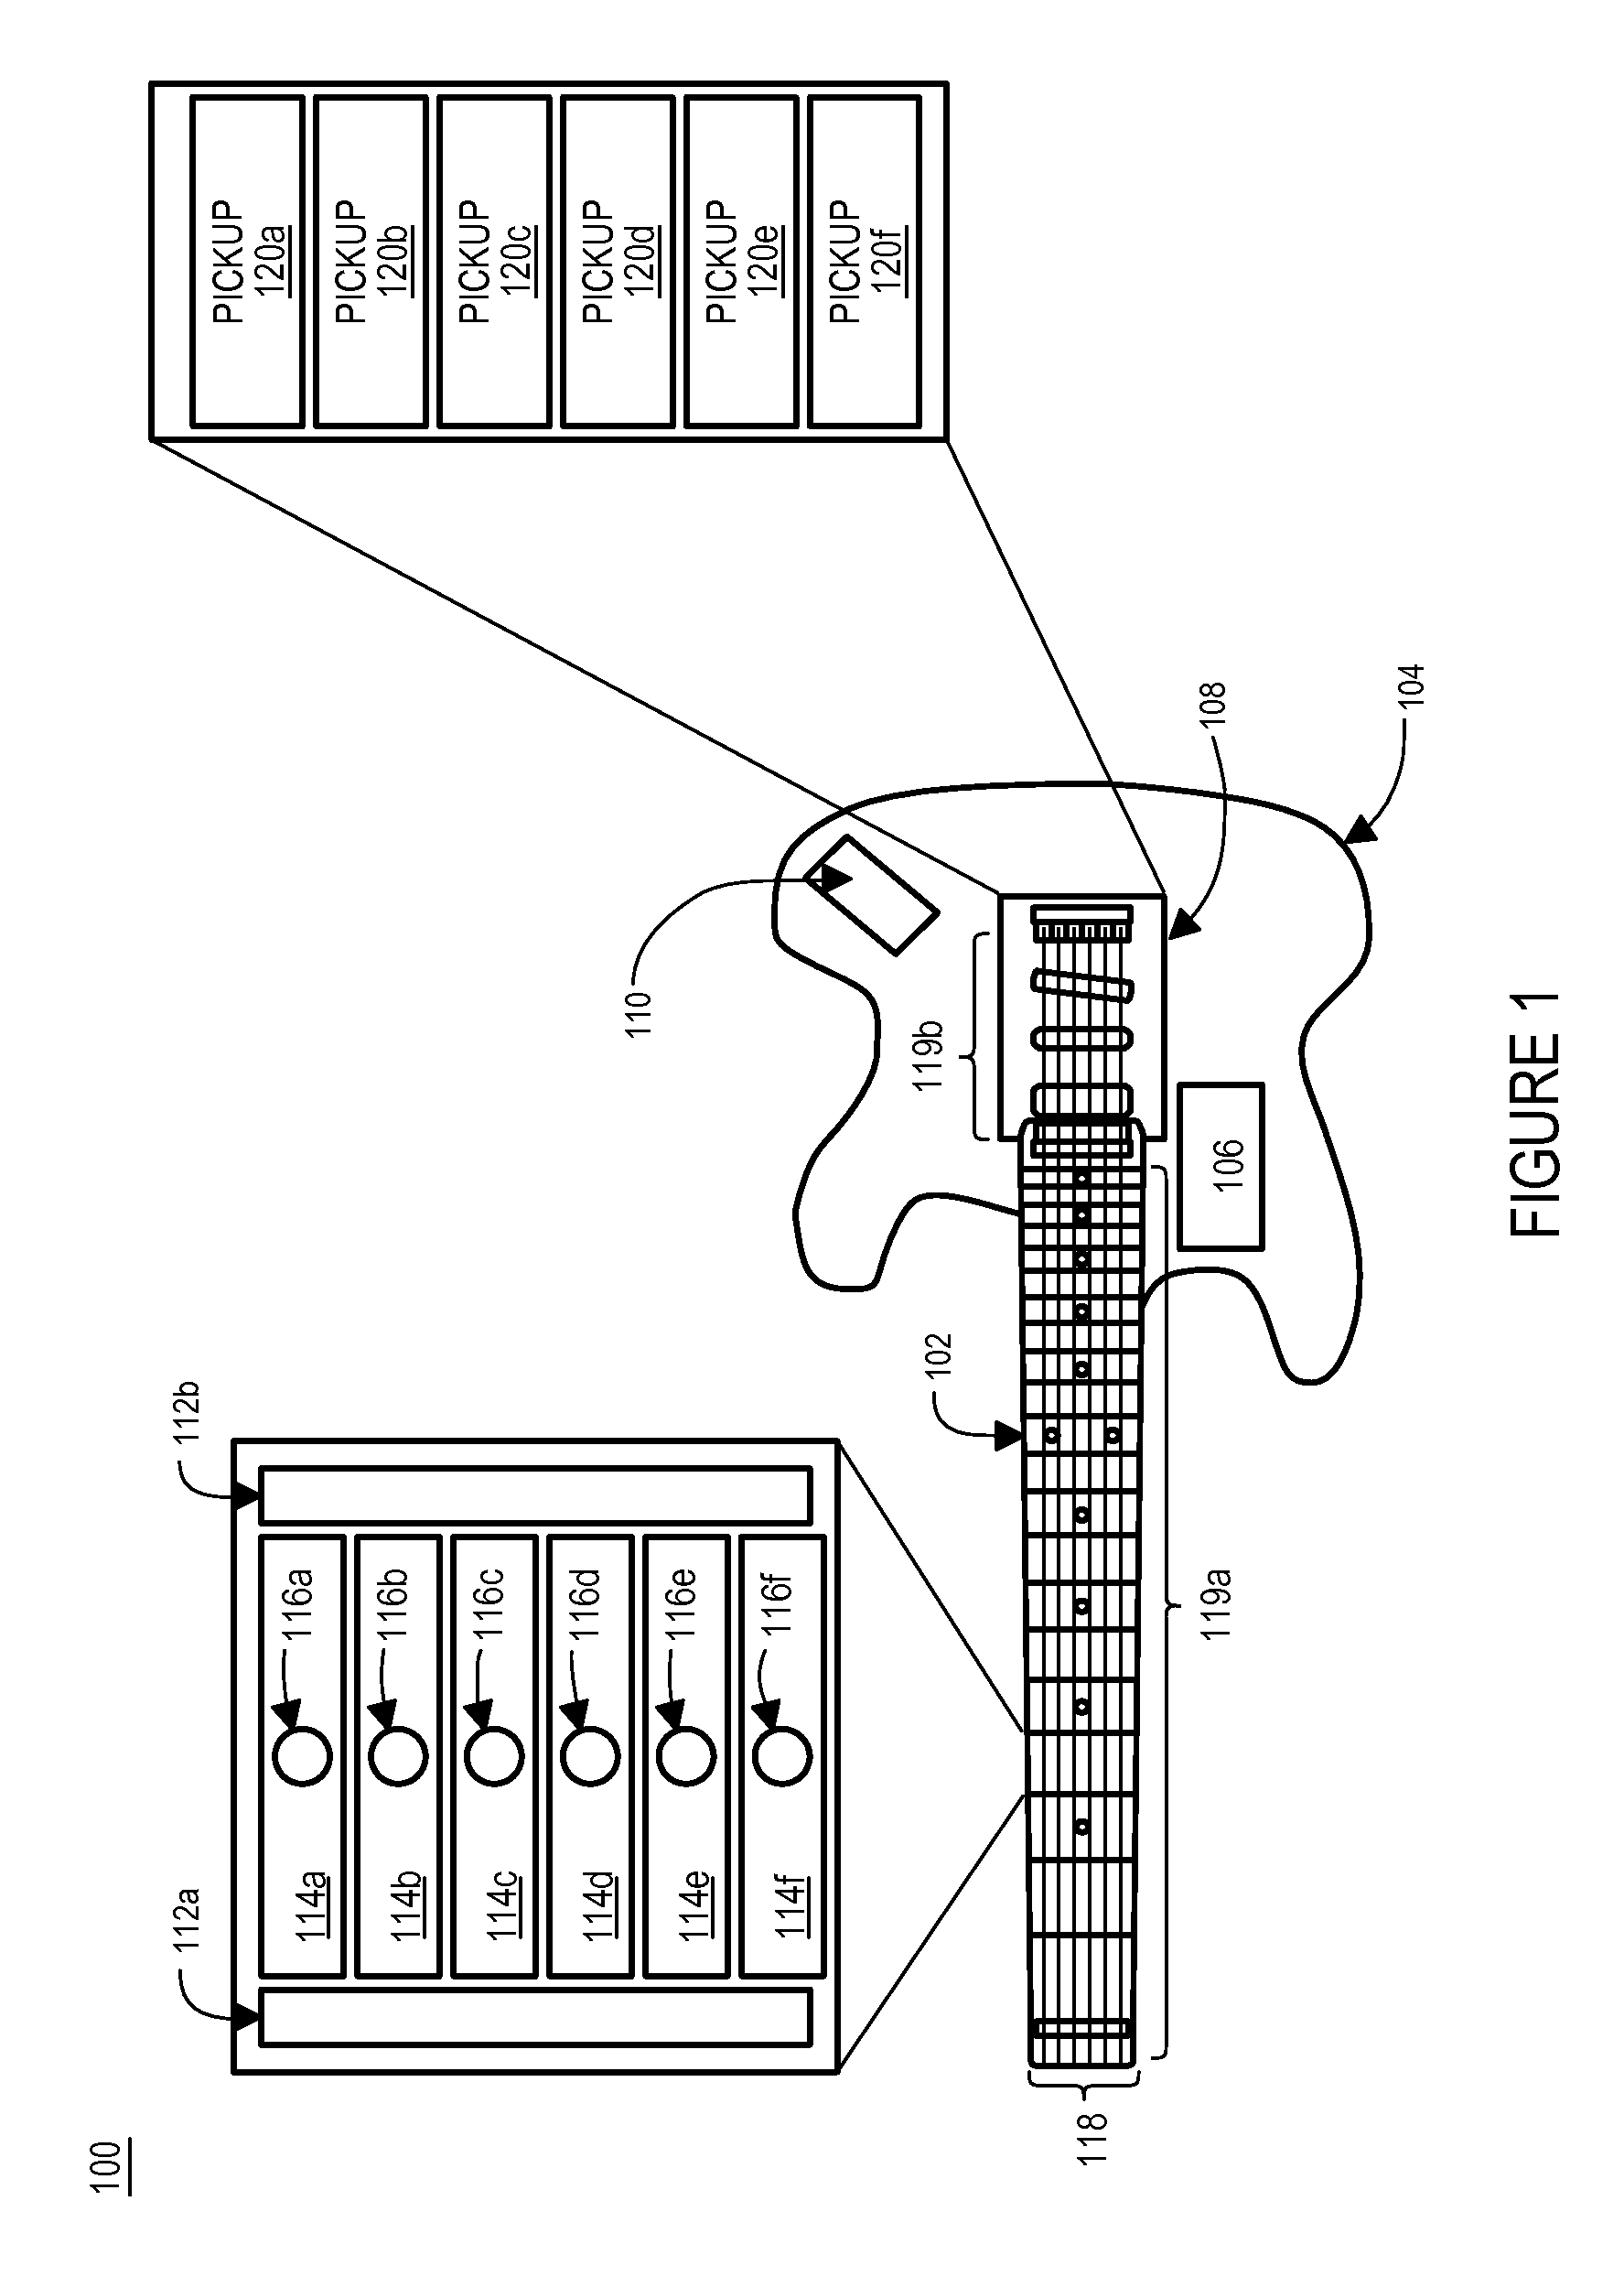 Detection and processing of signals in stringed instruments